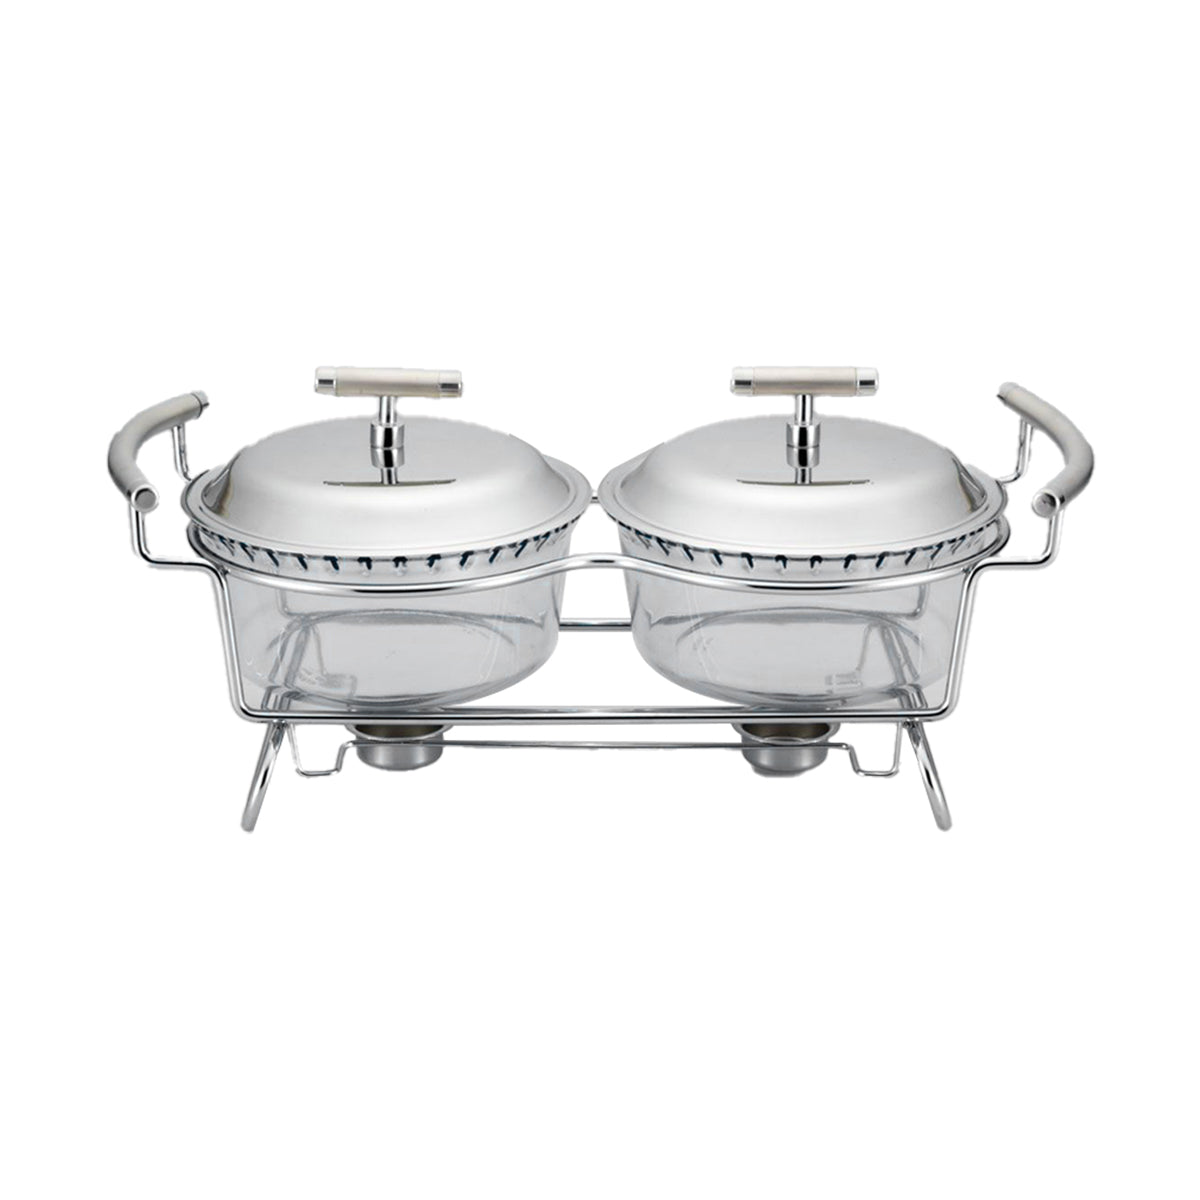 2 Round Soup Warmers with Two Candles -2x2.5 Lit. -Stainless Steel 18/10 & Tempered Glass